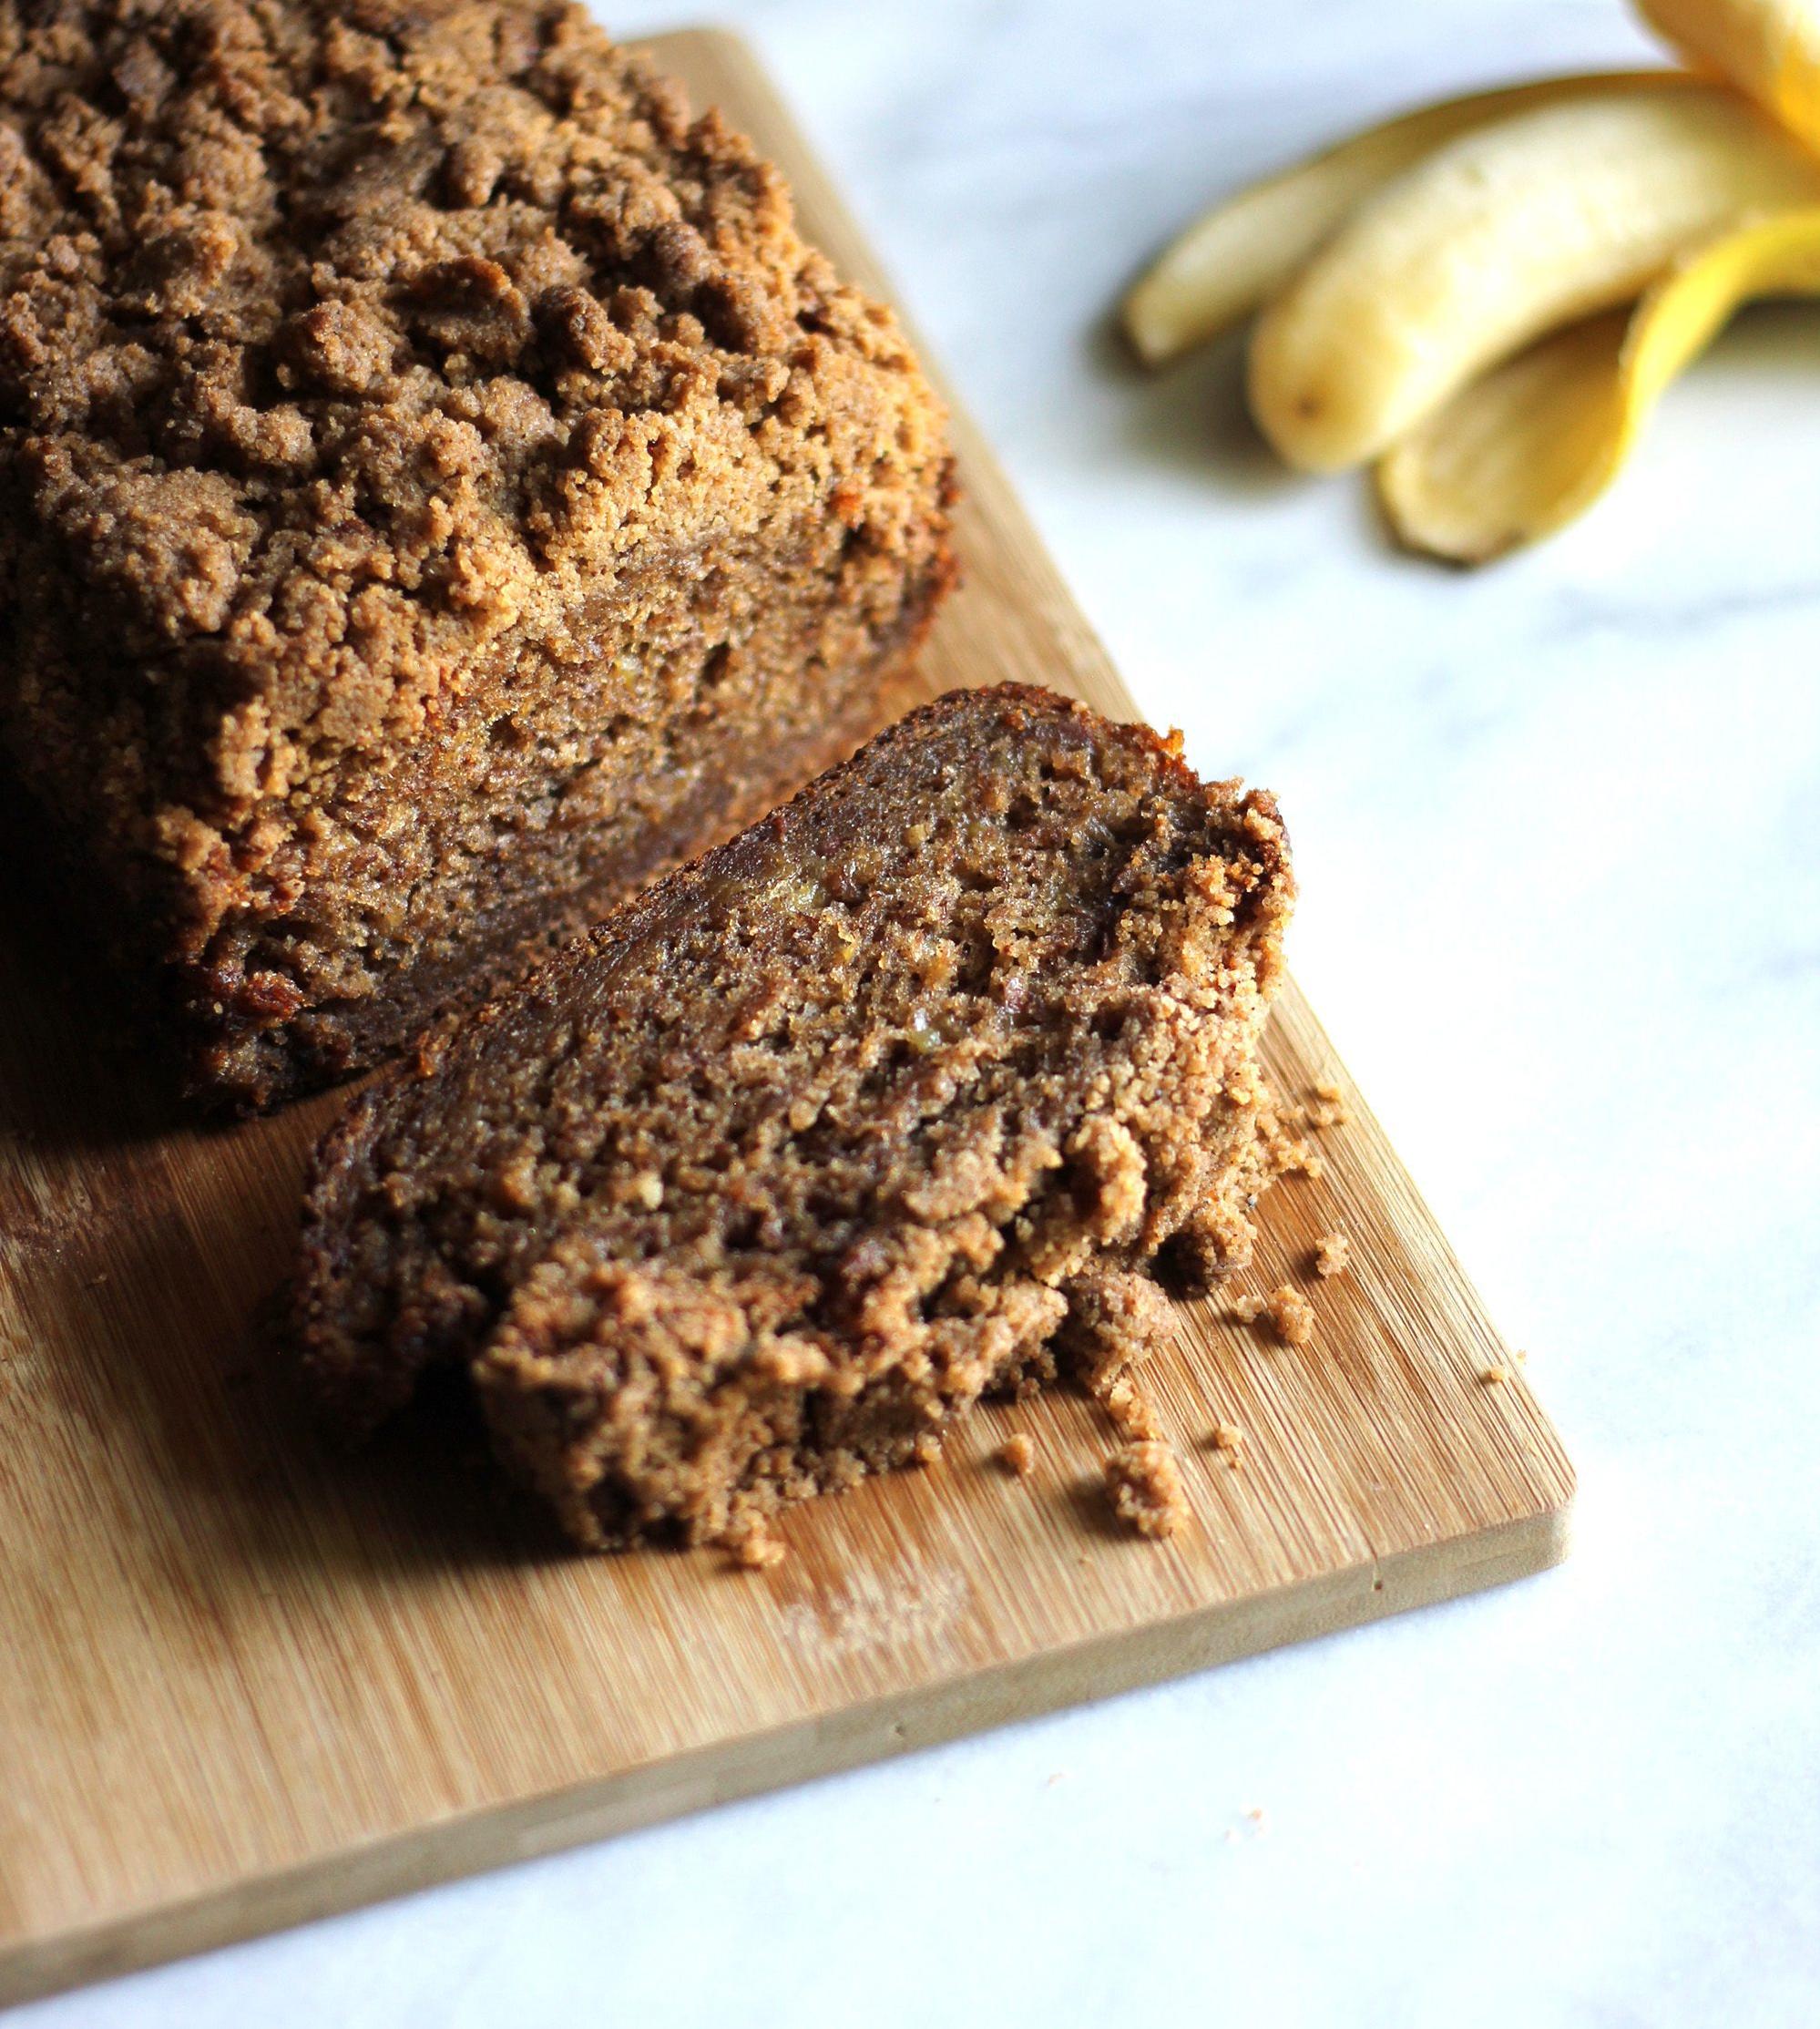  This eggless banana bread is coffee-licious!